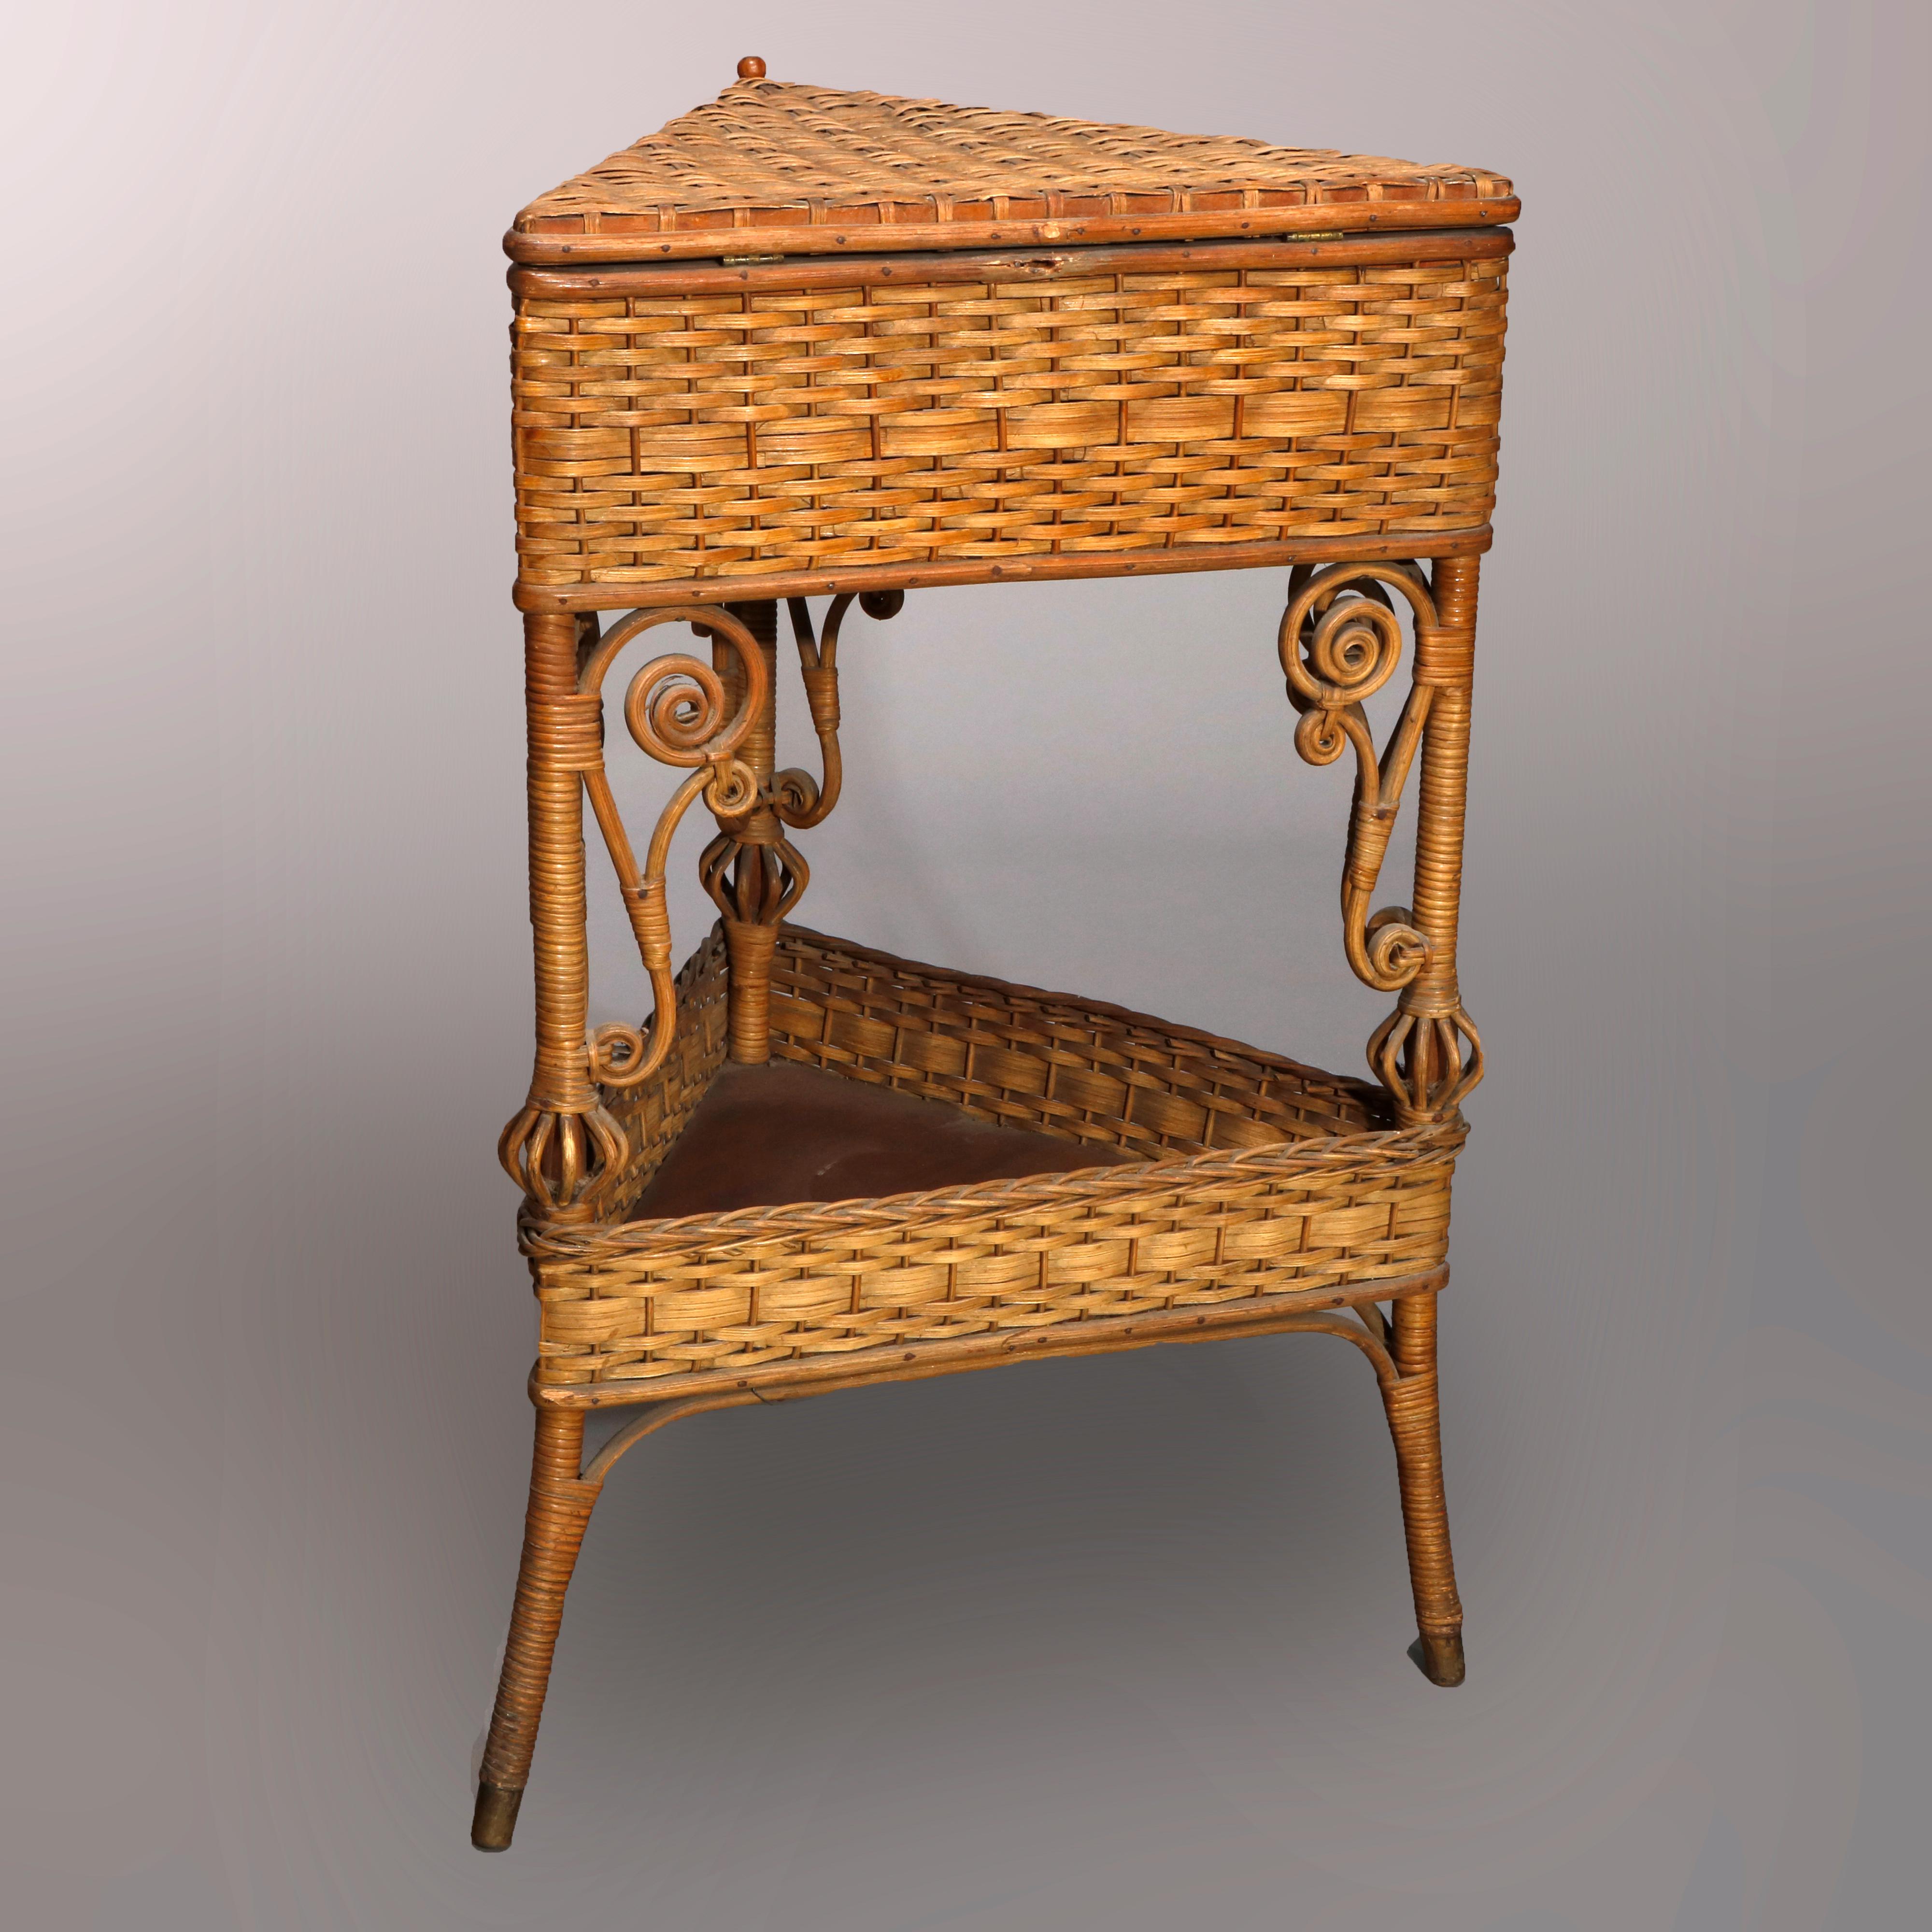 An antique Victorian corner sewing stand by Heywood Wakefield offers triangular form with wicker upper case having hinged lid surmounting lower tray raised on legs with scroll form corbels, circa 1890

Measures- 28.25